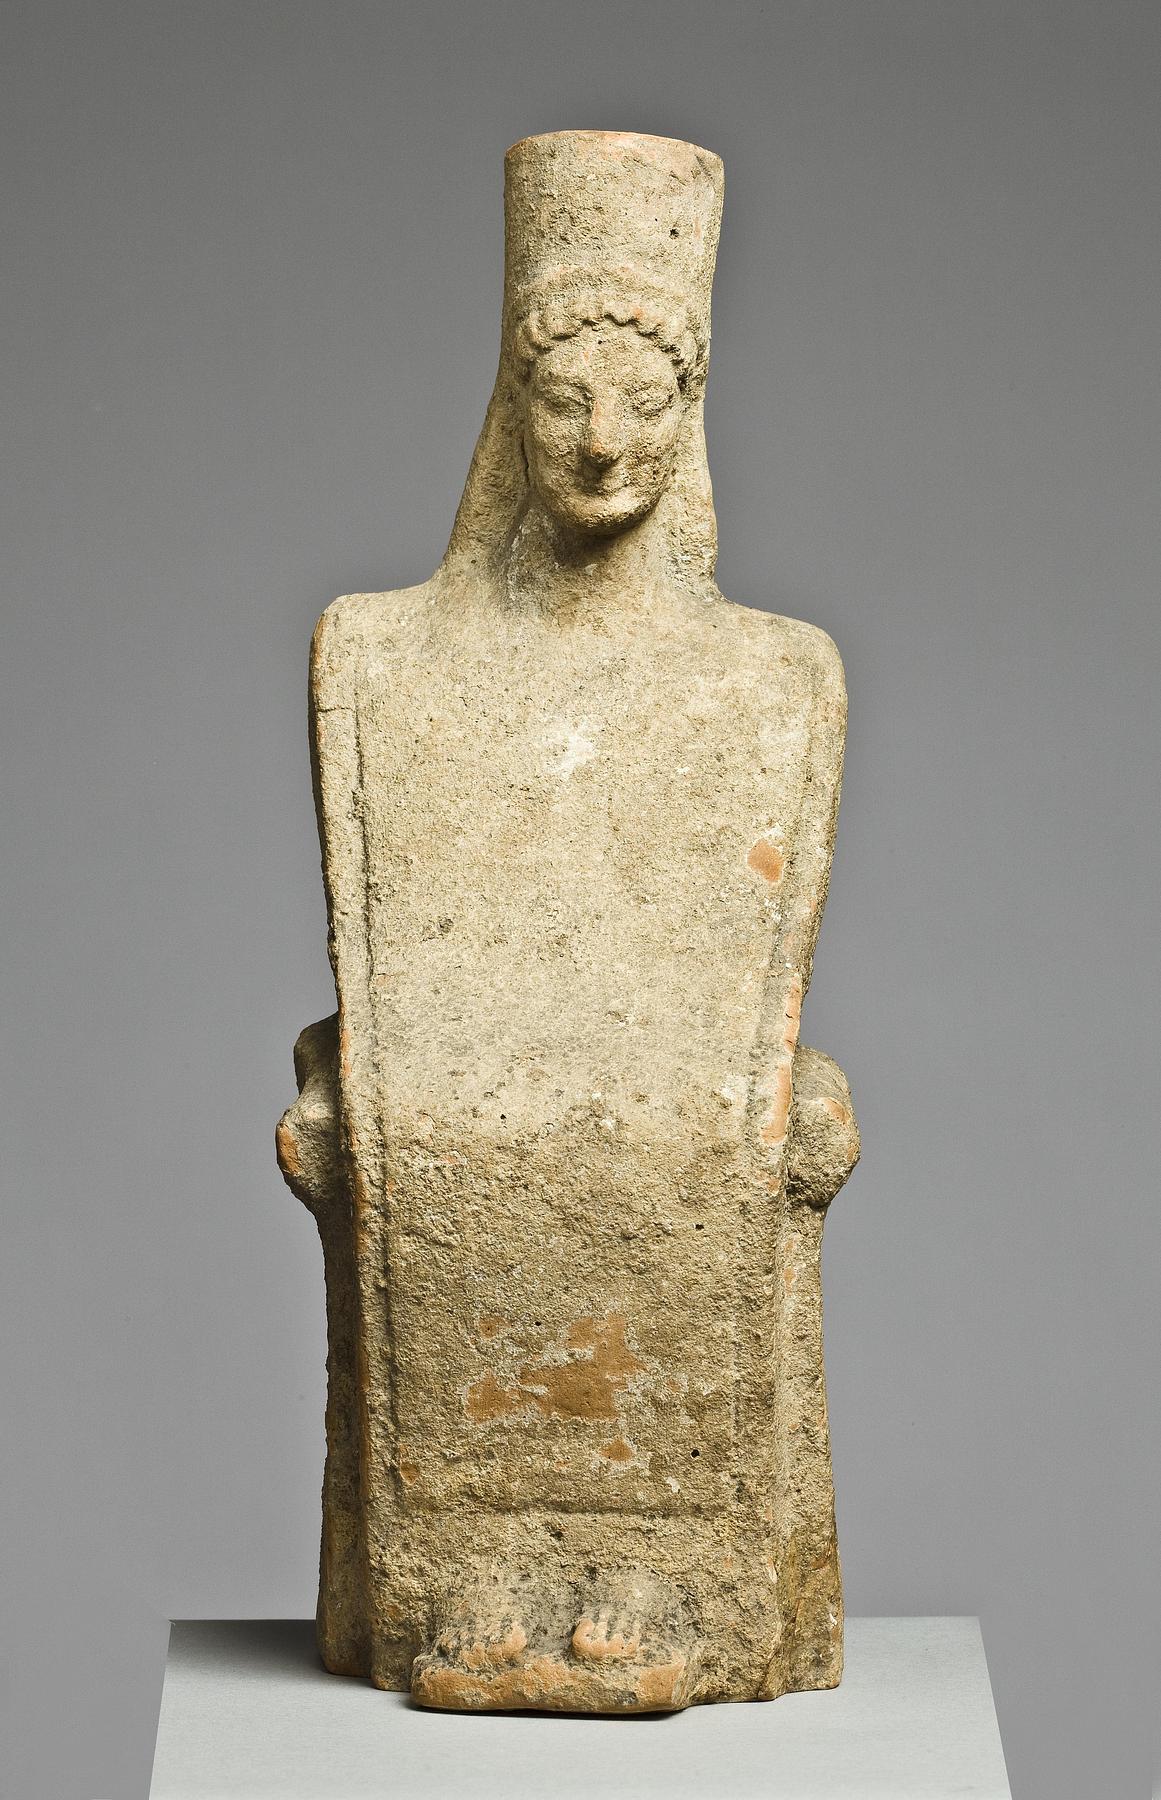 Statuette of a seated woman, H1001